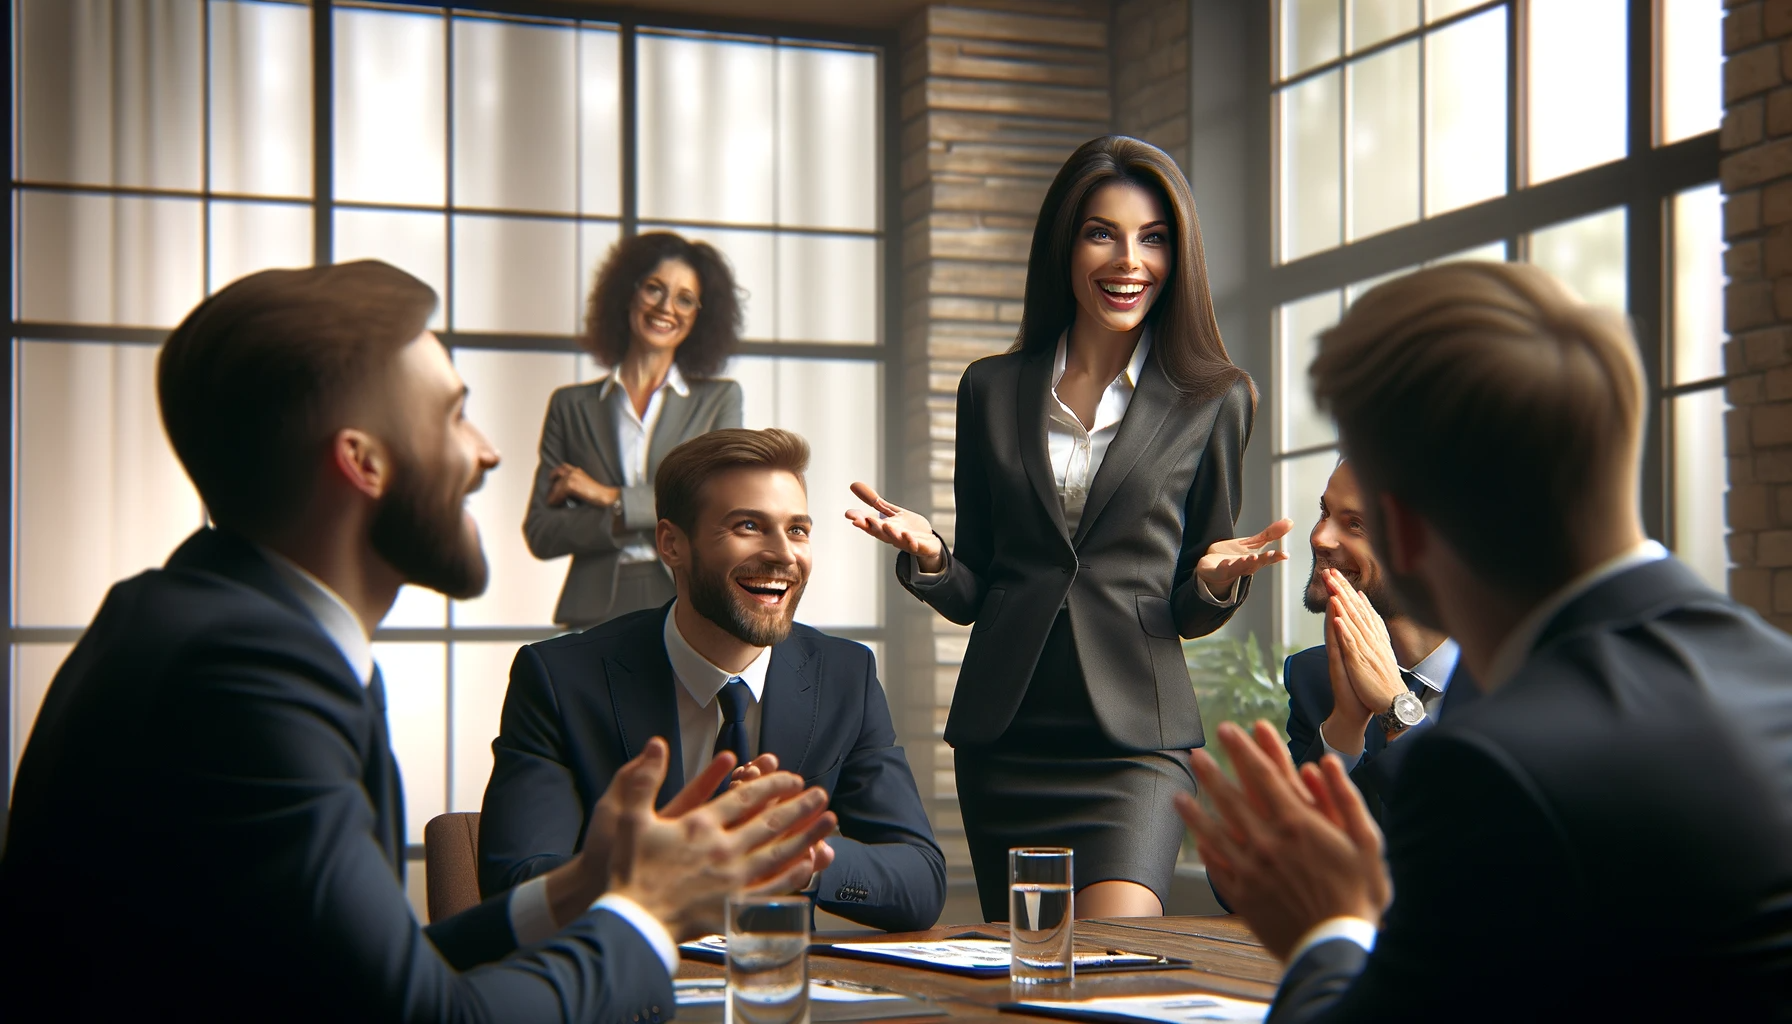 Building Authority in Sales: Empowering Your Team to Lead with Confidence